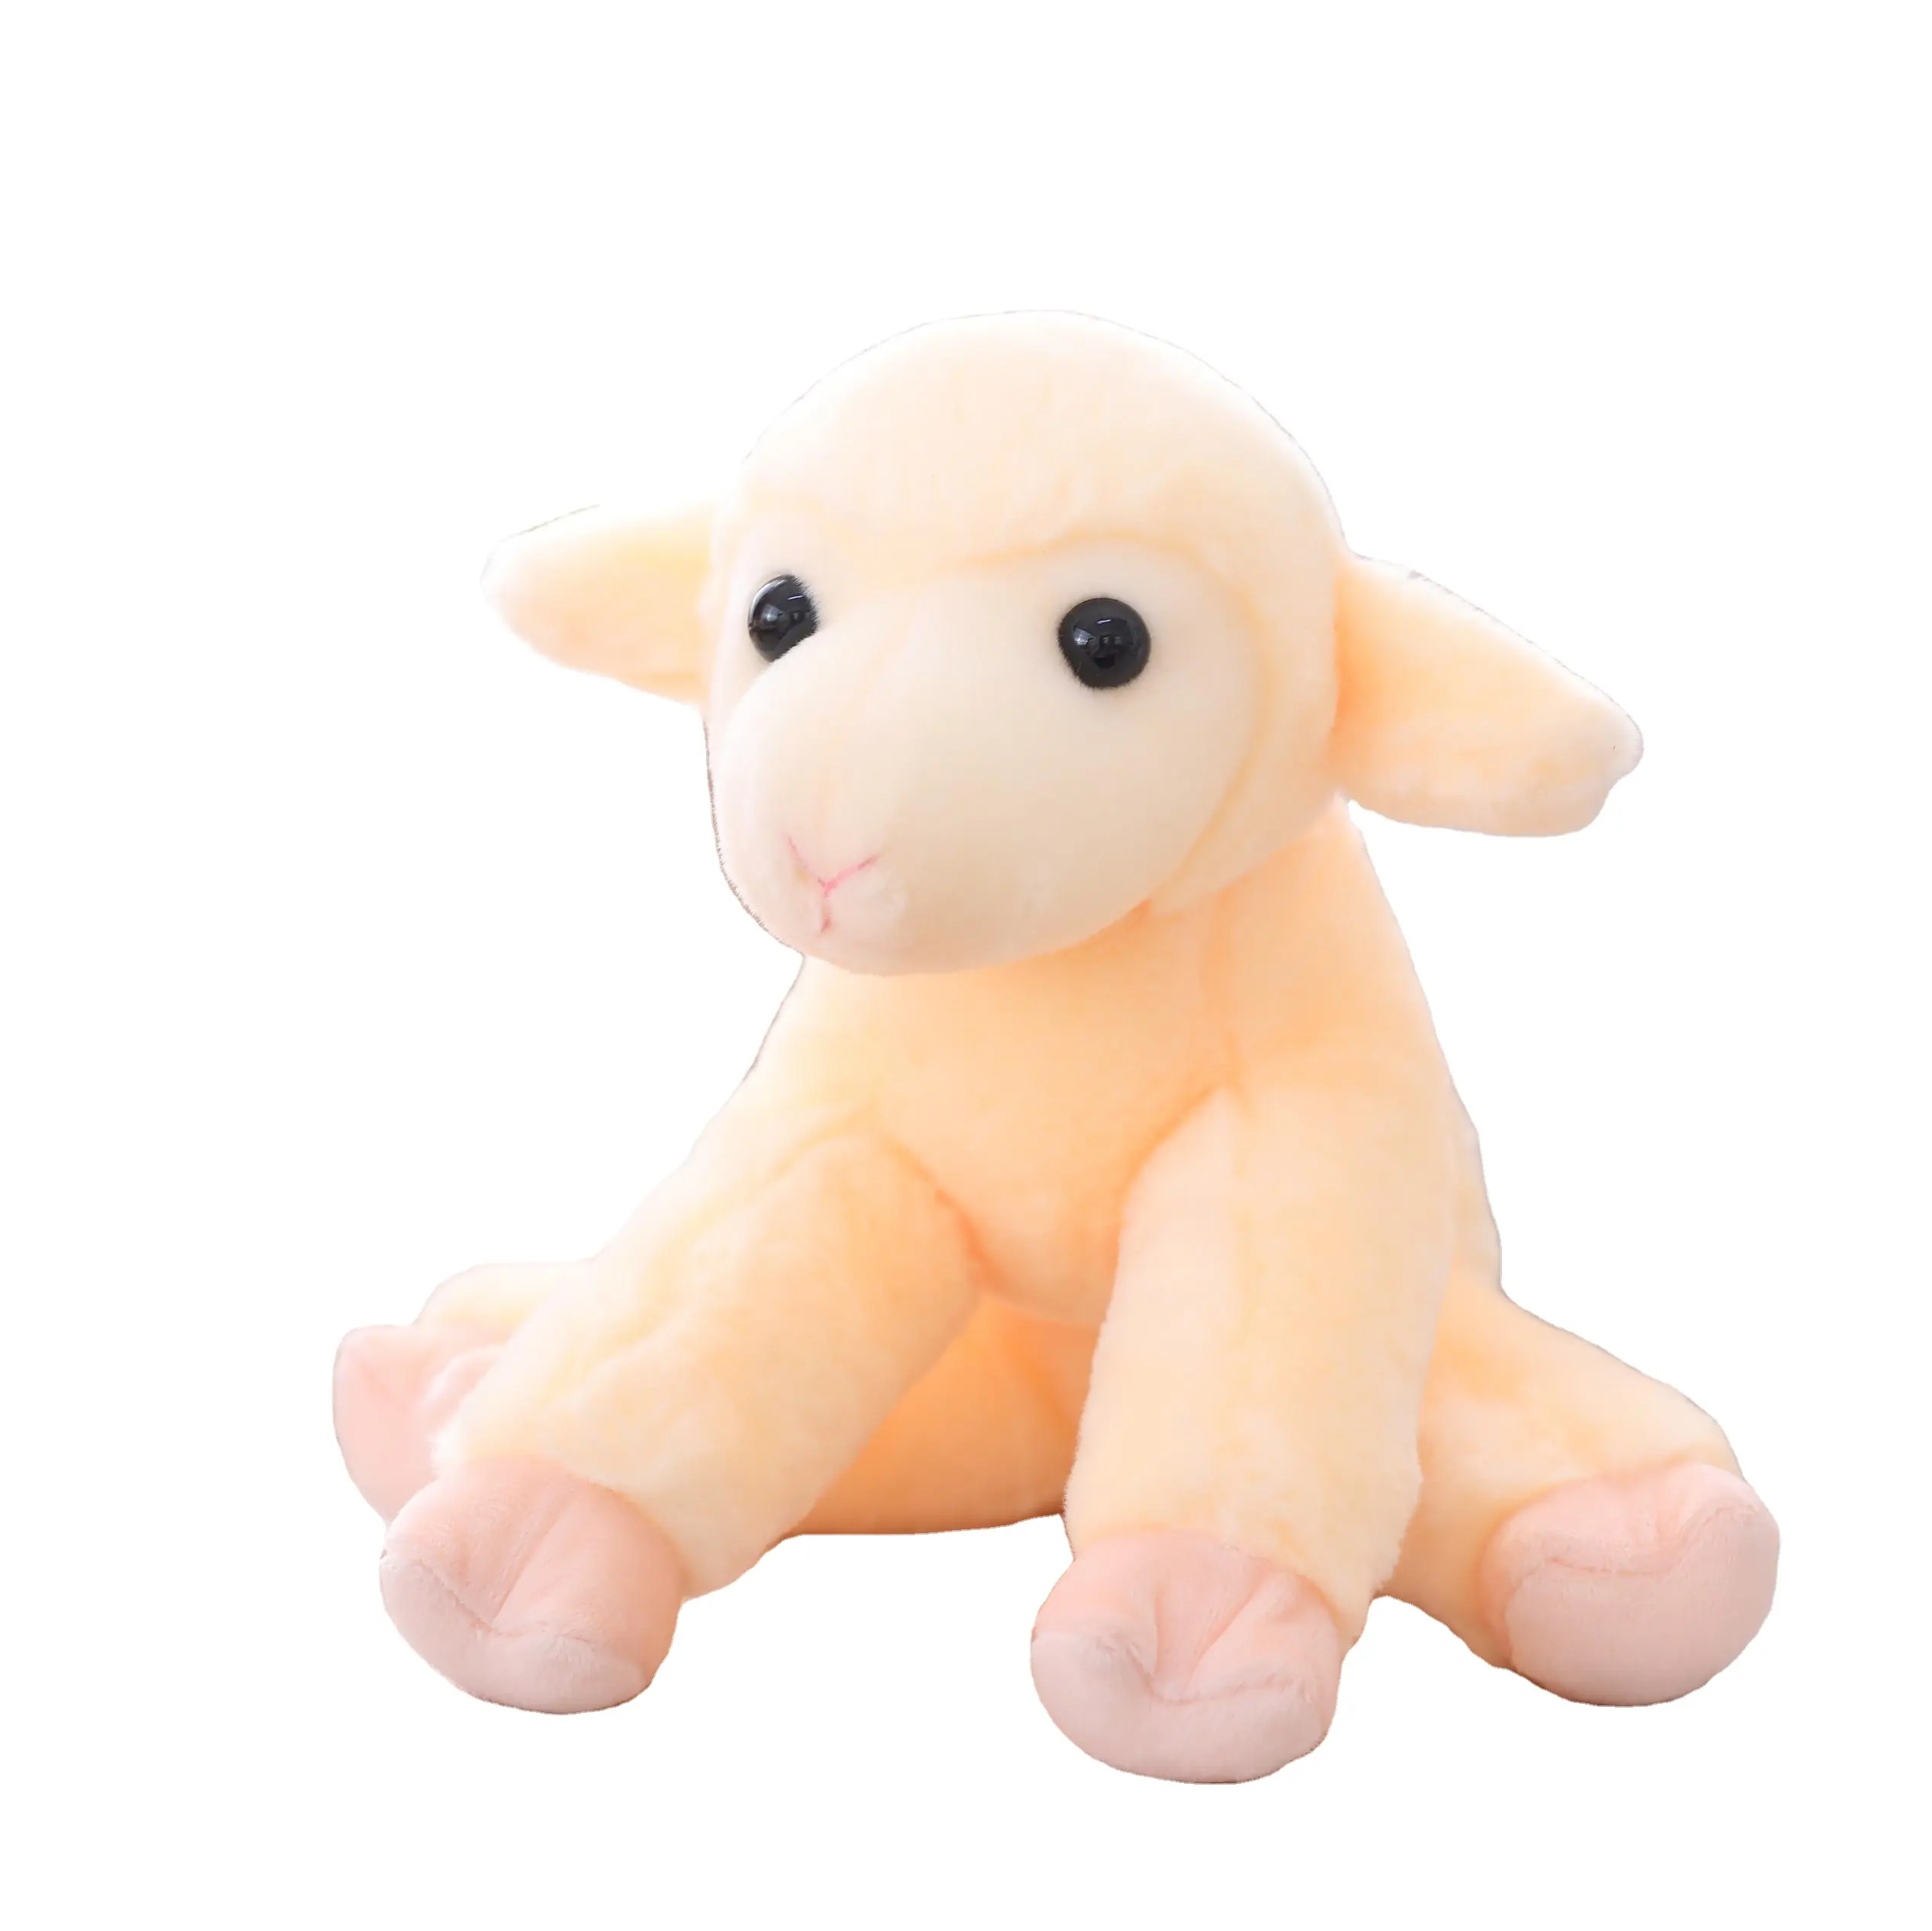 Best selling stuffed animal yellow toys for kids for stuffing gifts lamb plush toy